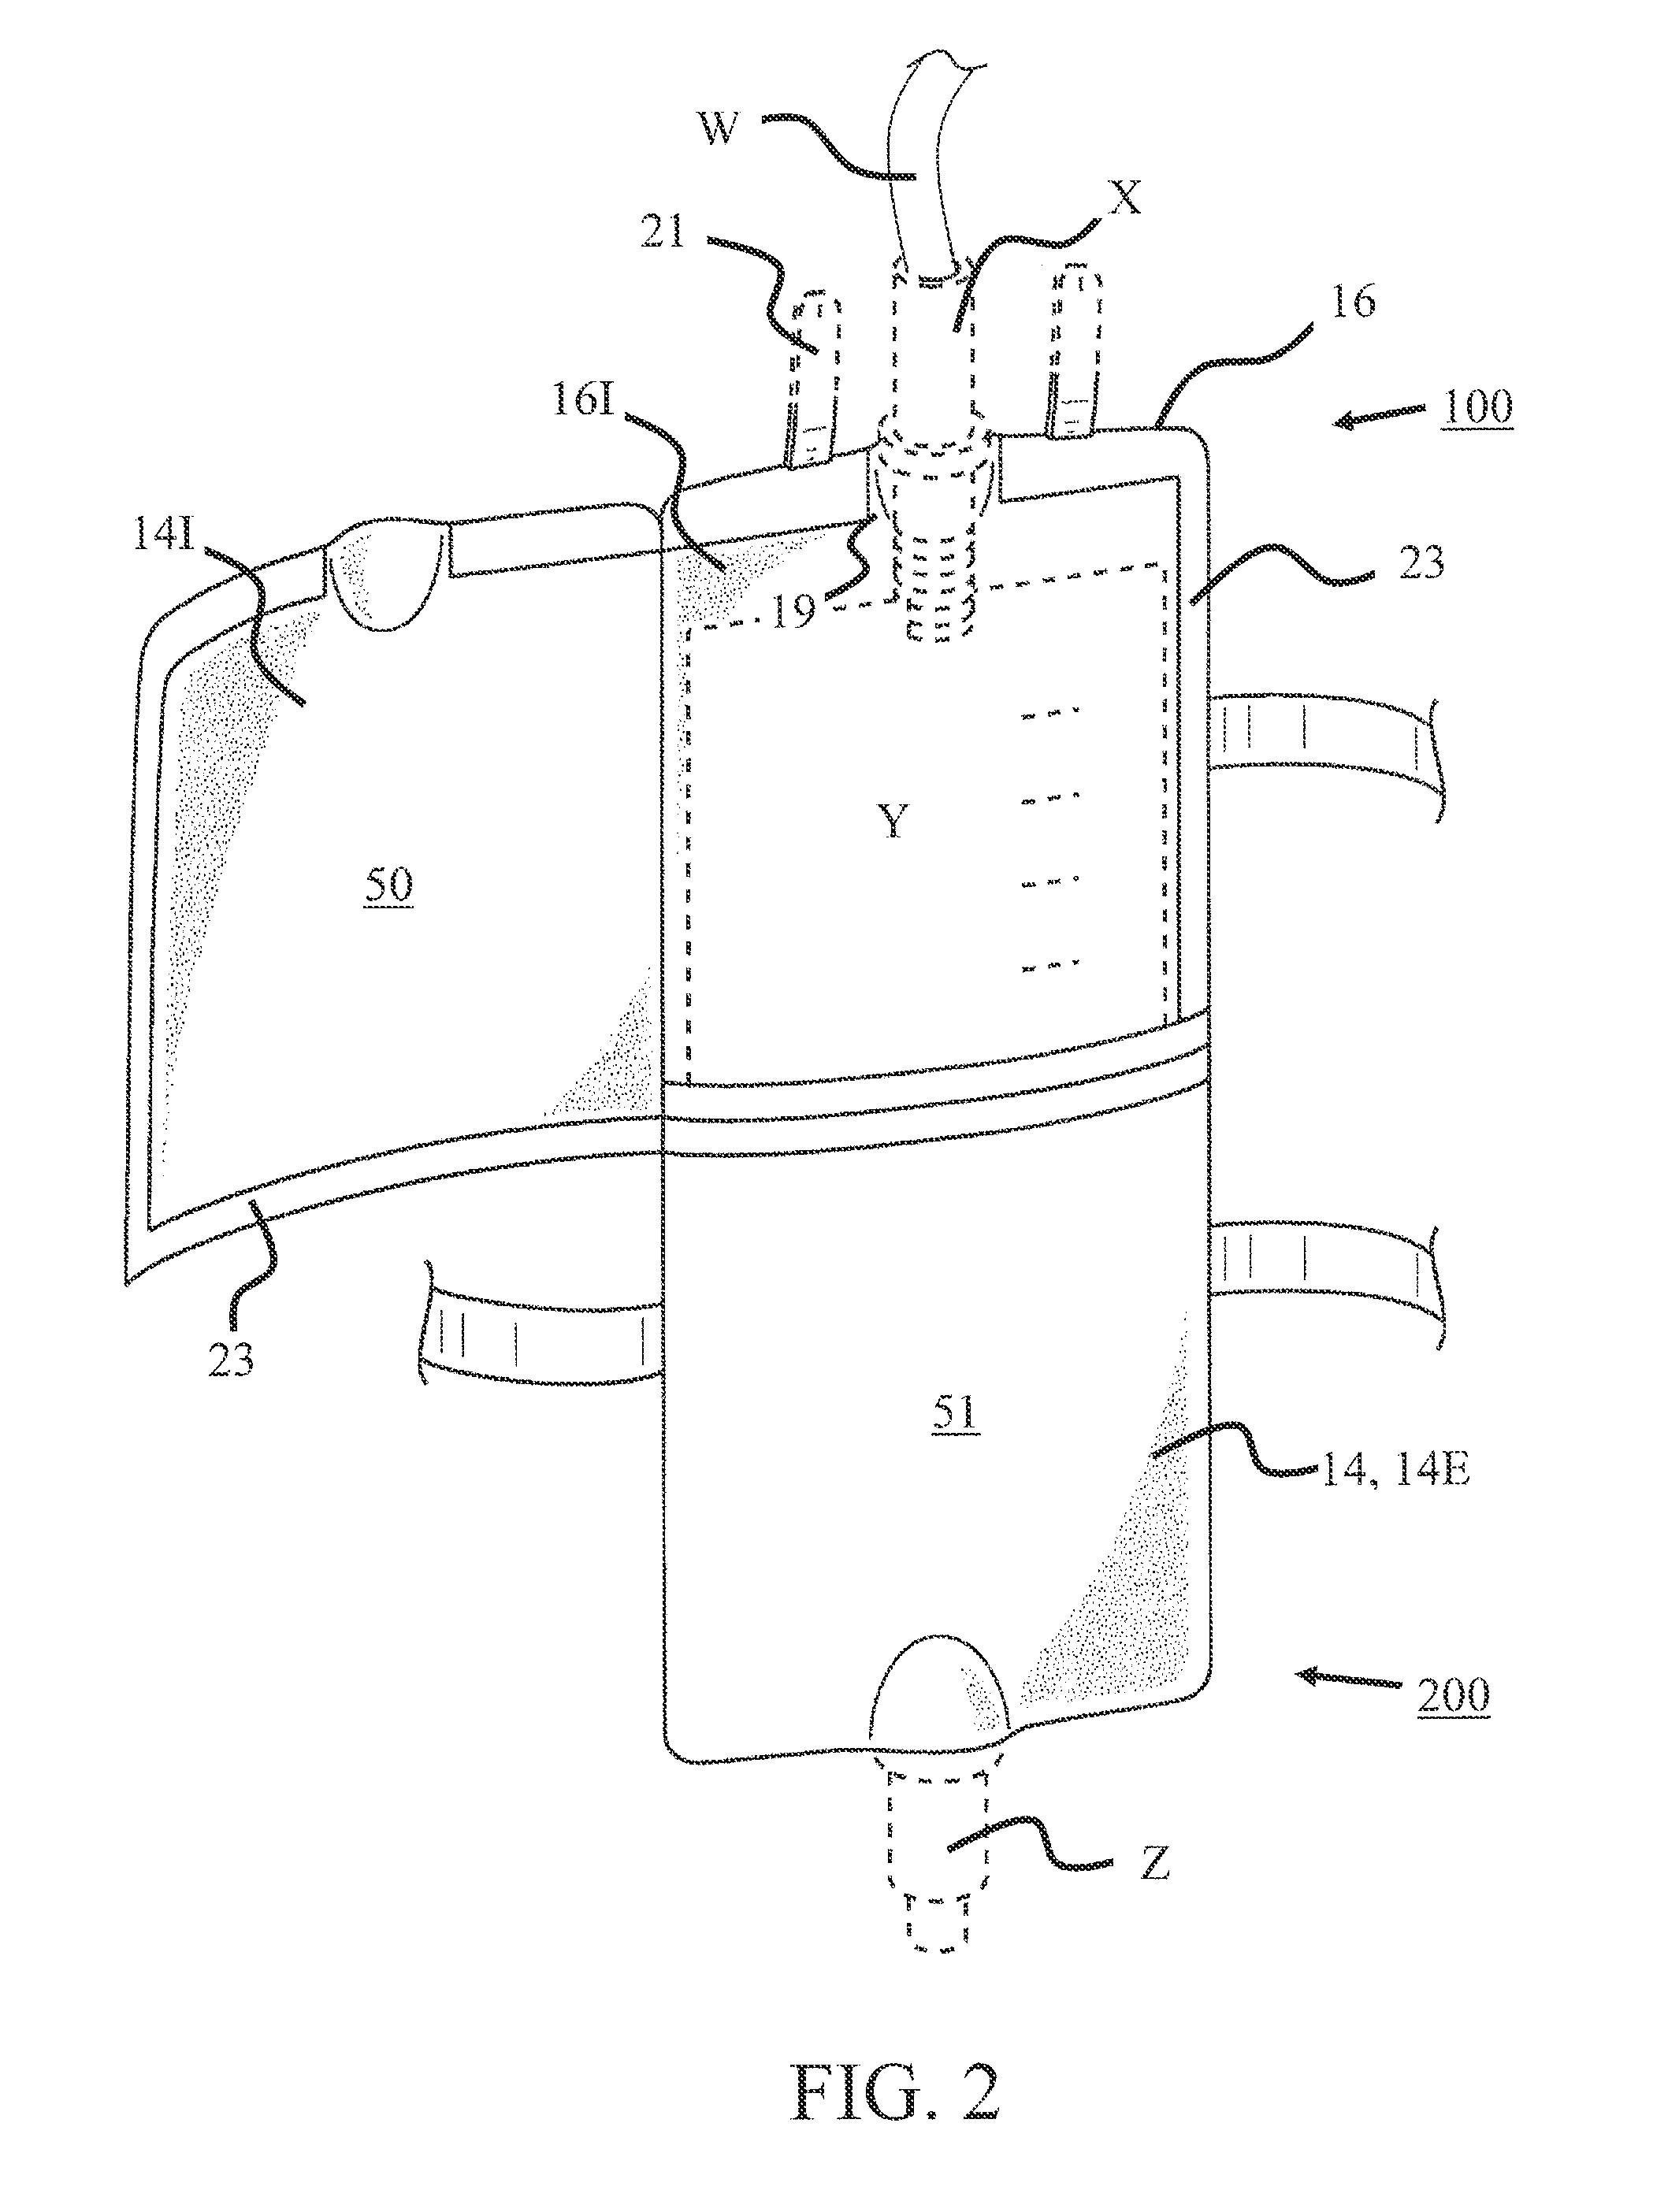 Devices for concealing a urine collection bag and that provide access to monitor and manipulate a urine collection bag therein